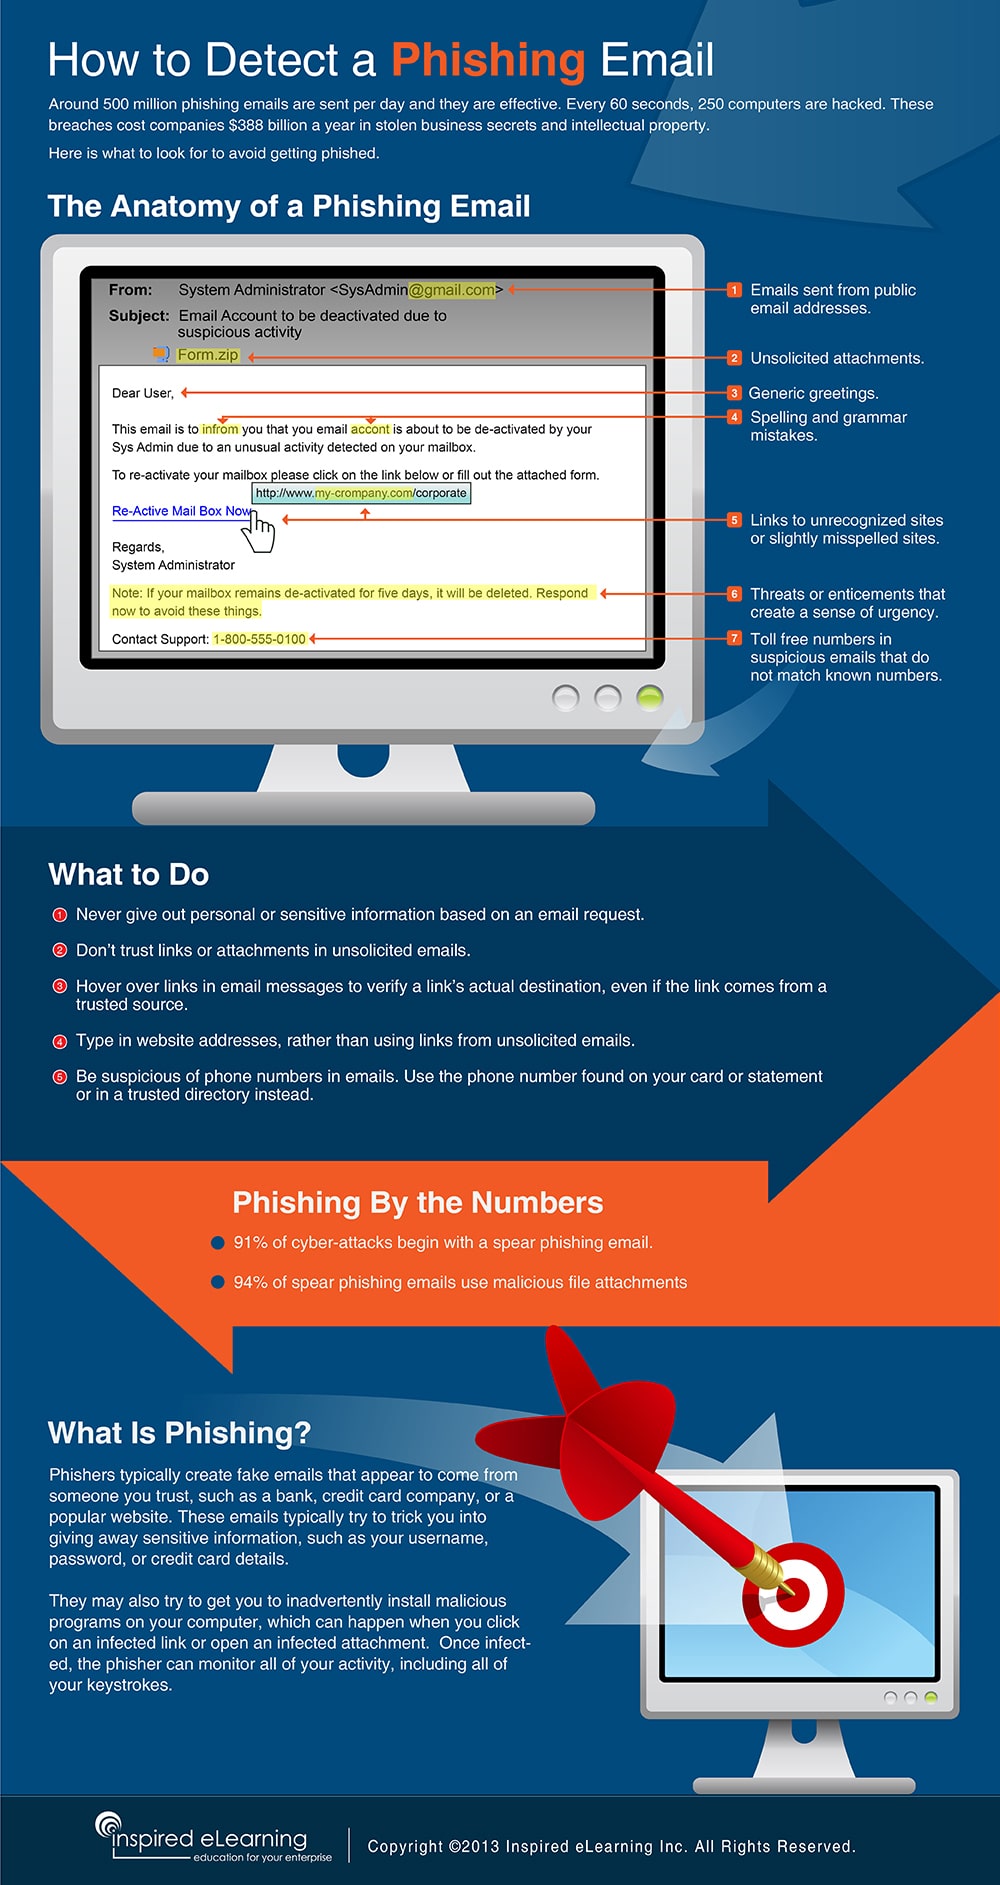 What A Phishing Email Looks Like And How To Detect One [Infographic]